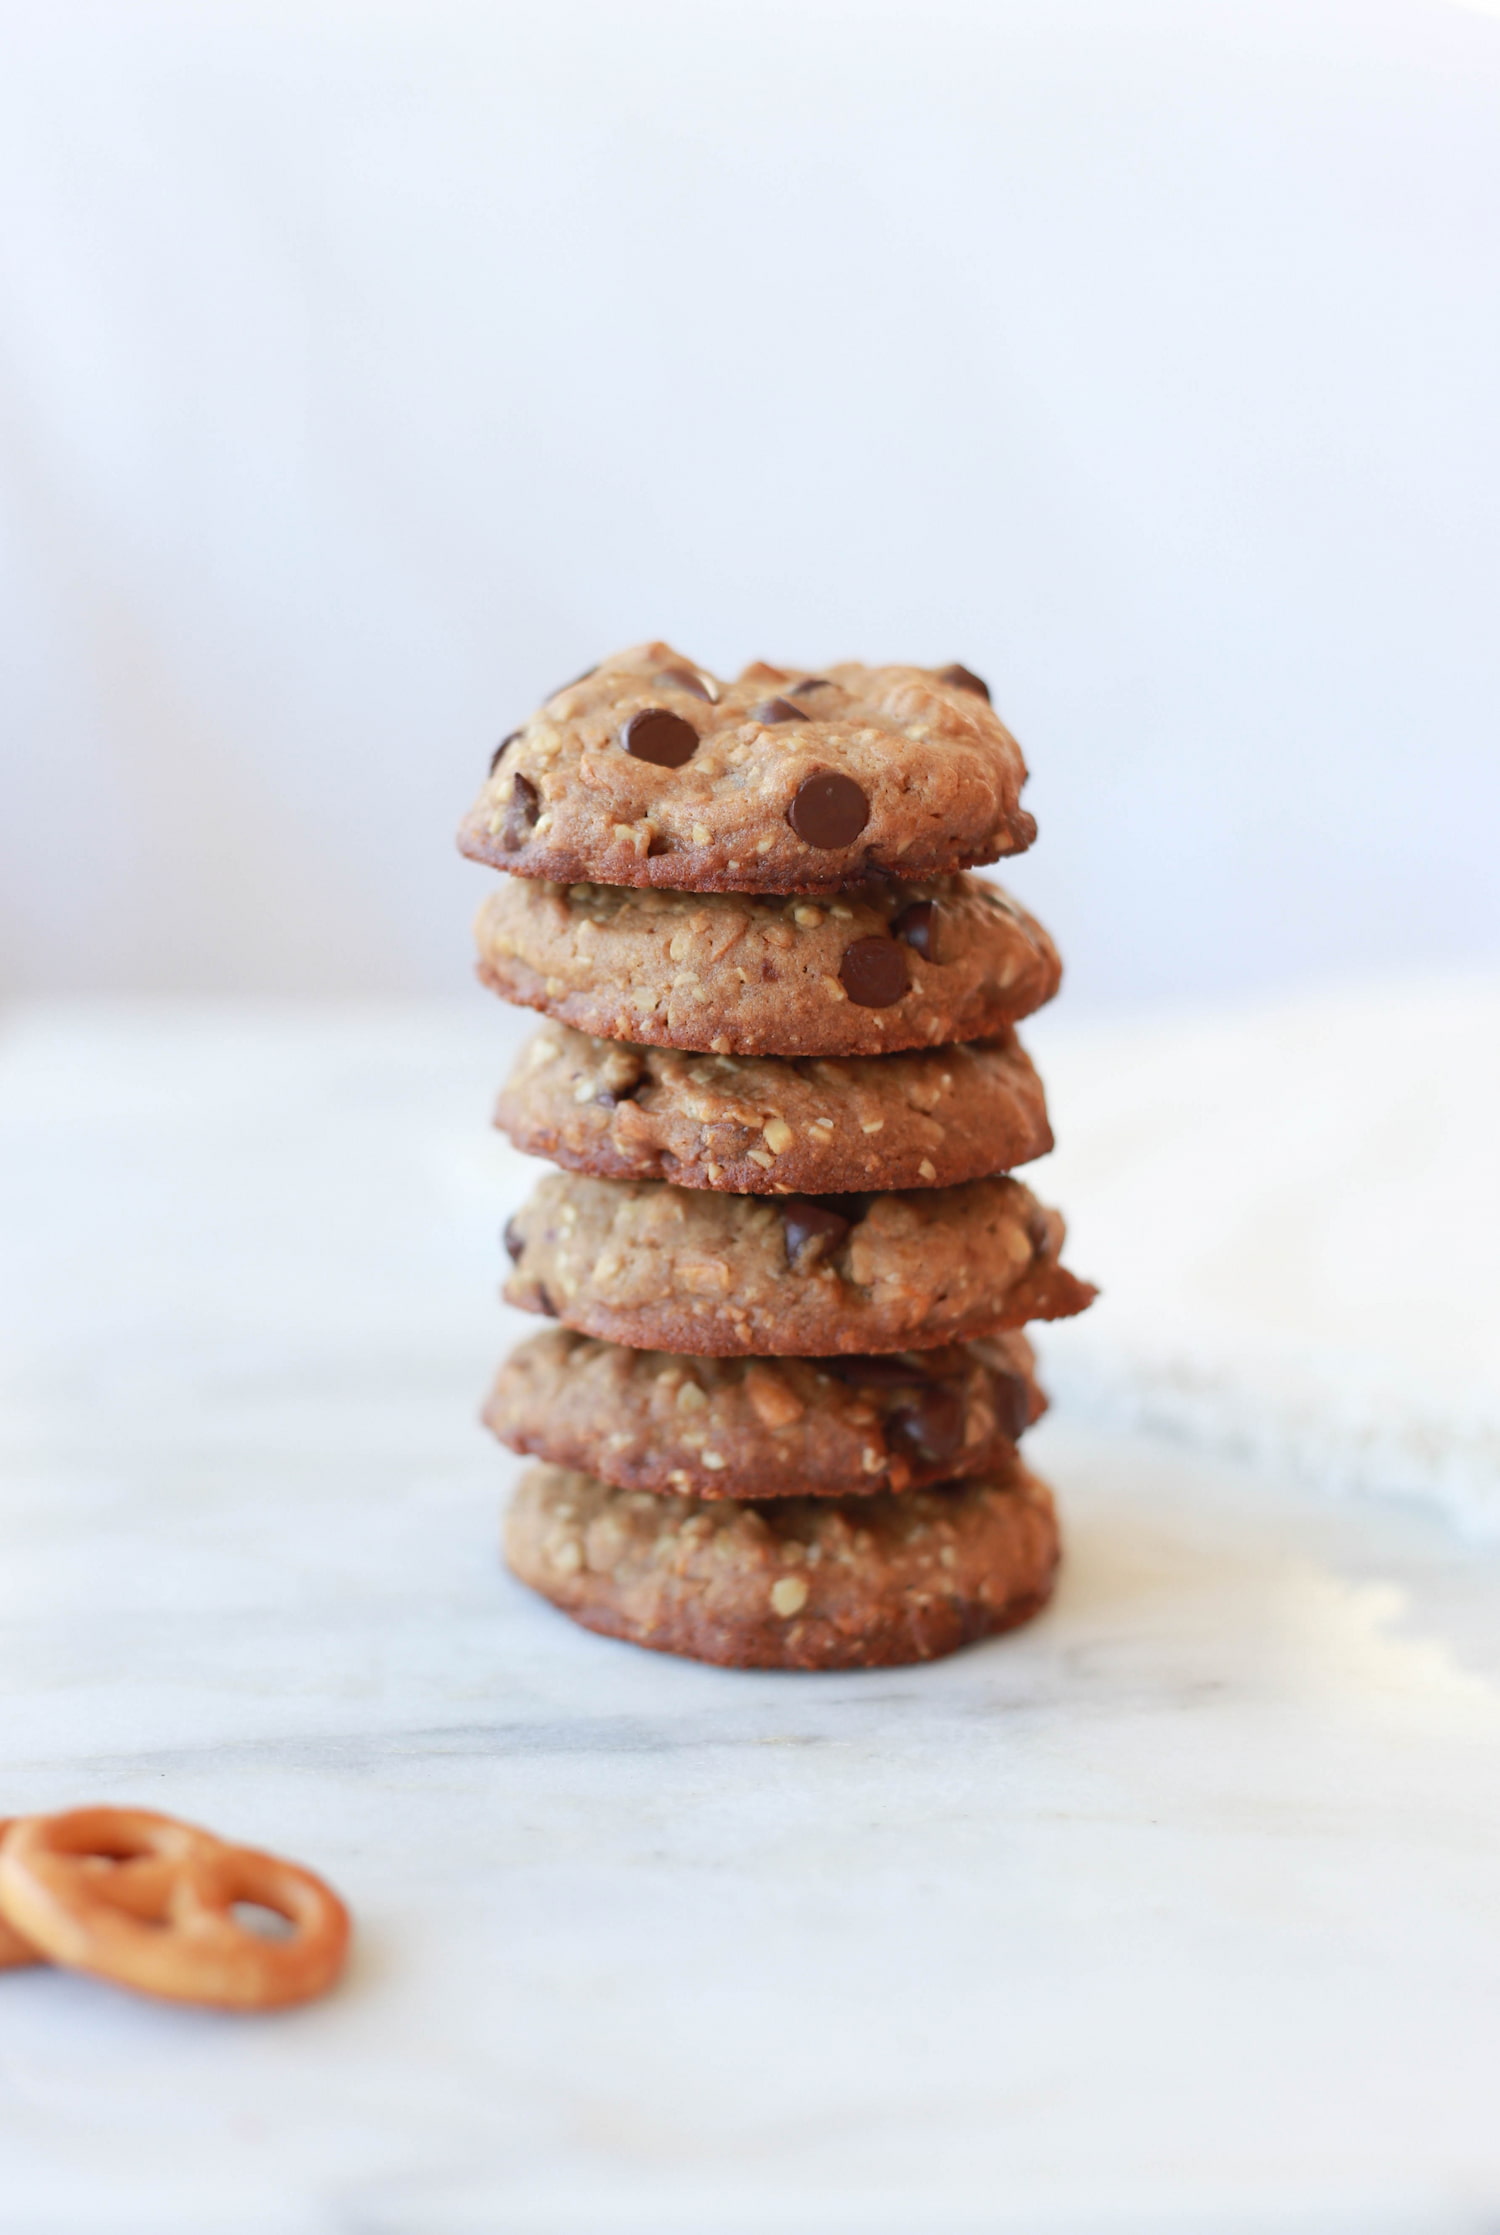 Cookie with chocolate chips, pretzels, graham crackers, oats